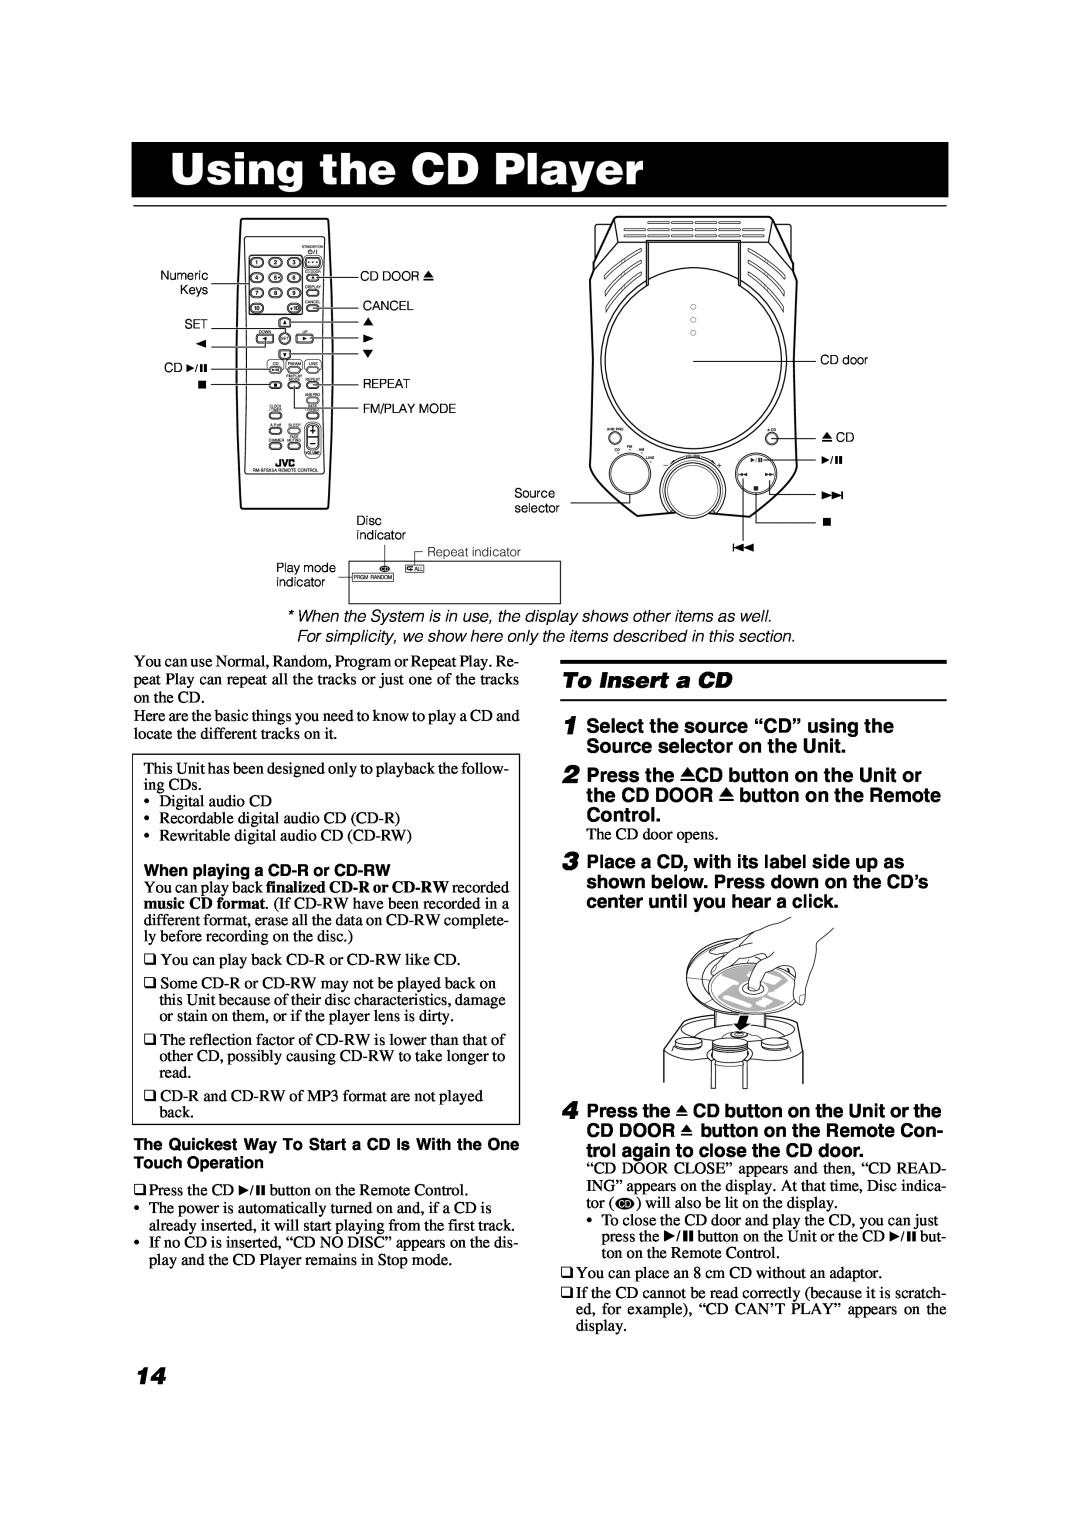 JVC LVT1040-008A manual Using the CD Player, To Insert a CD, Control 